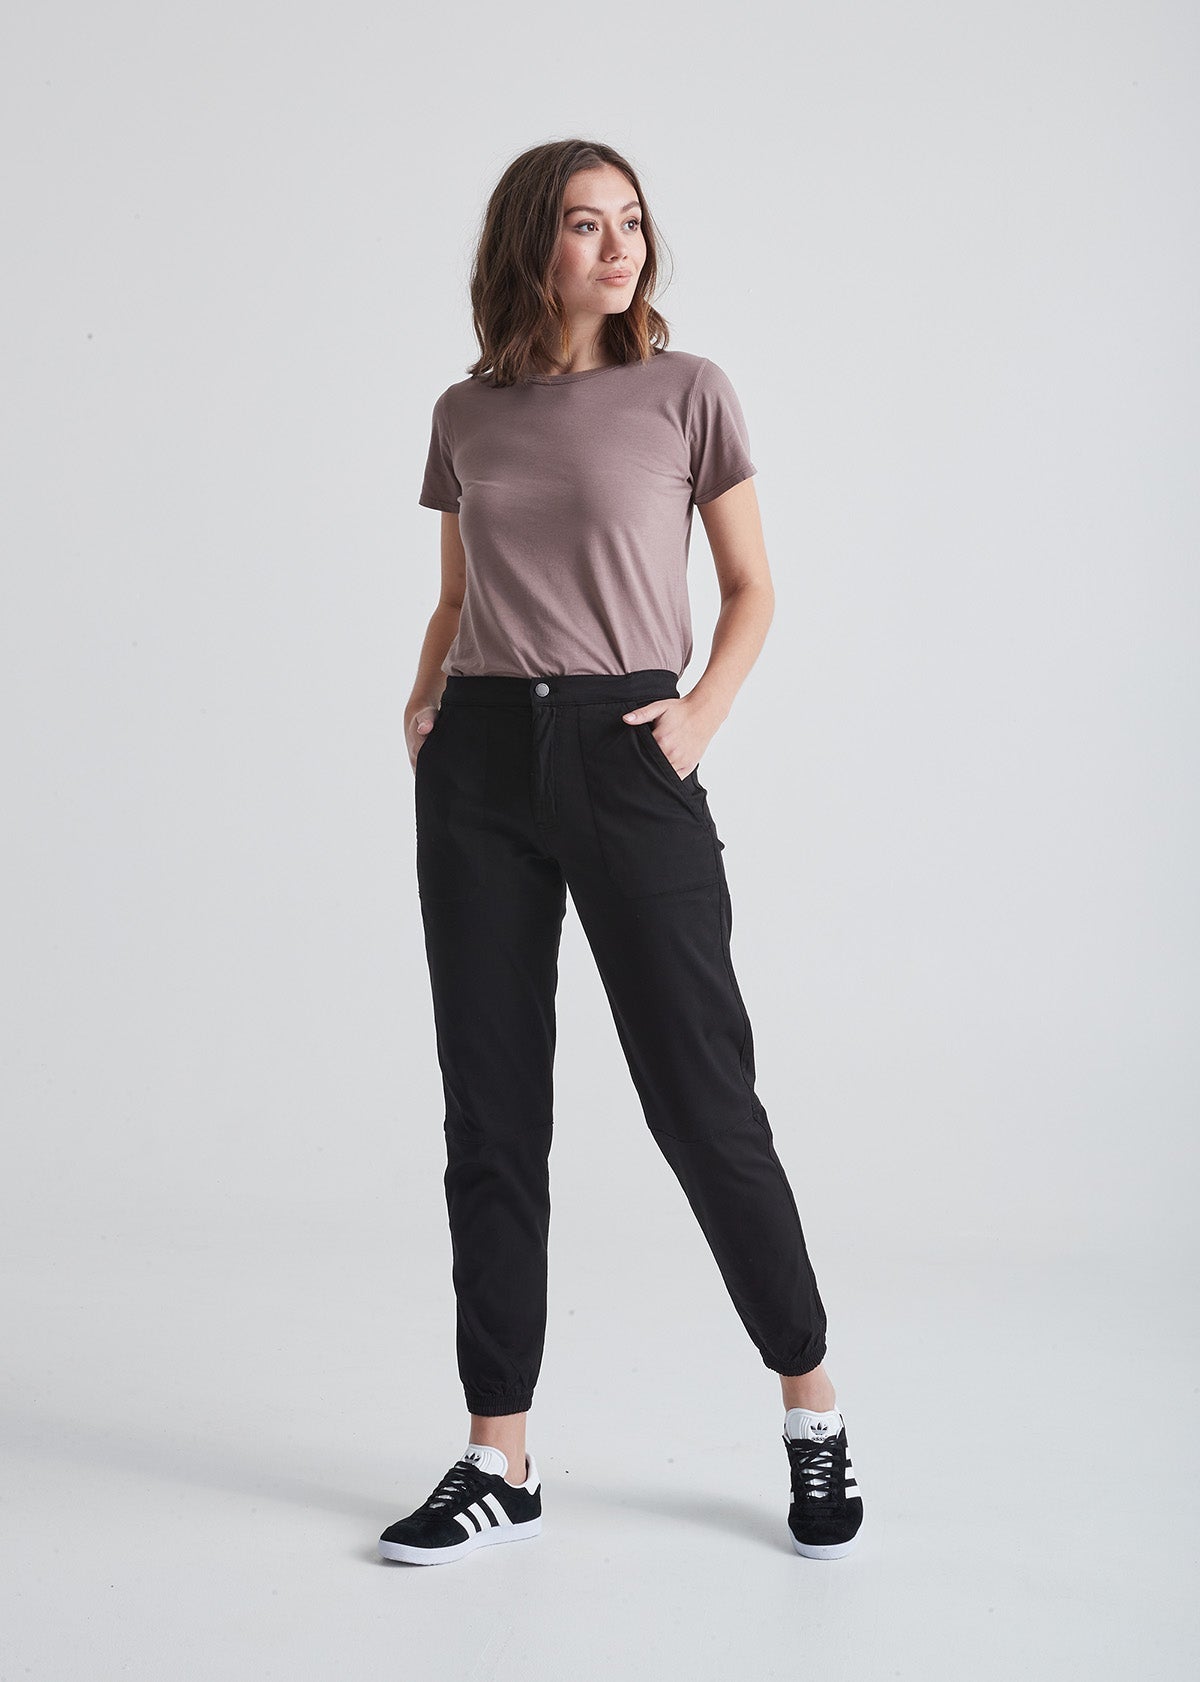 Travel Pants & Jeans for Women – Tagged waist-24